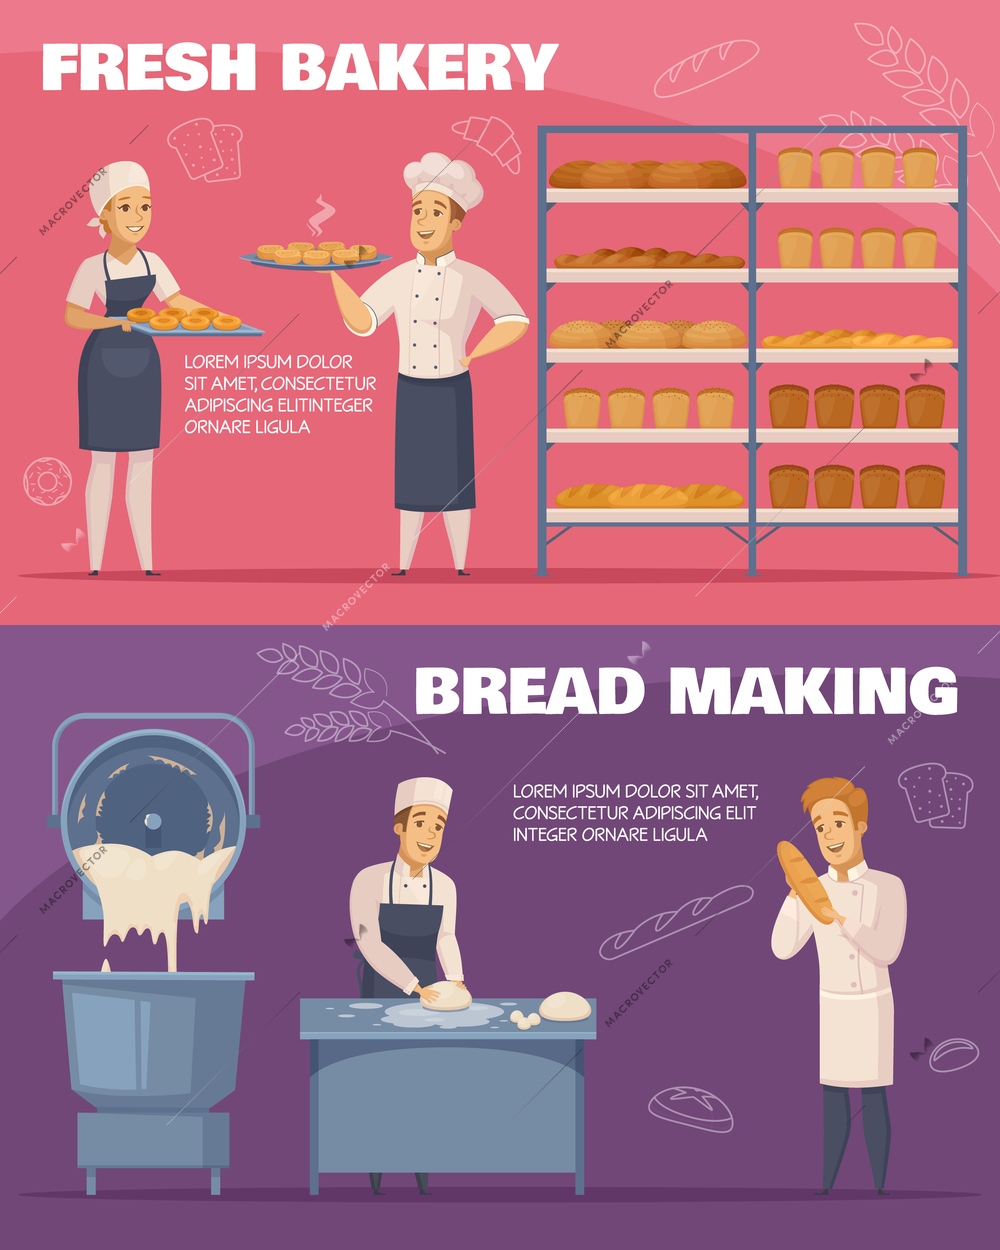 Horizontal cartoon banners isolated on pink and purple backgrounds with fresh bakery and bread making vector illustration